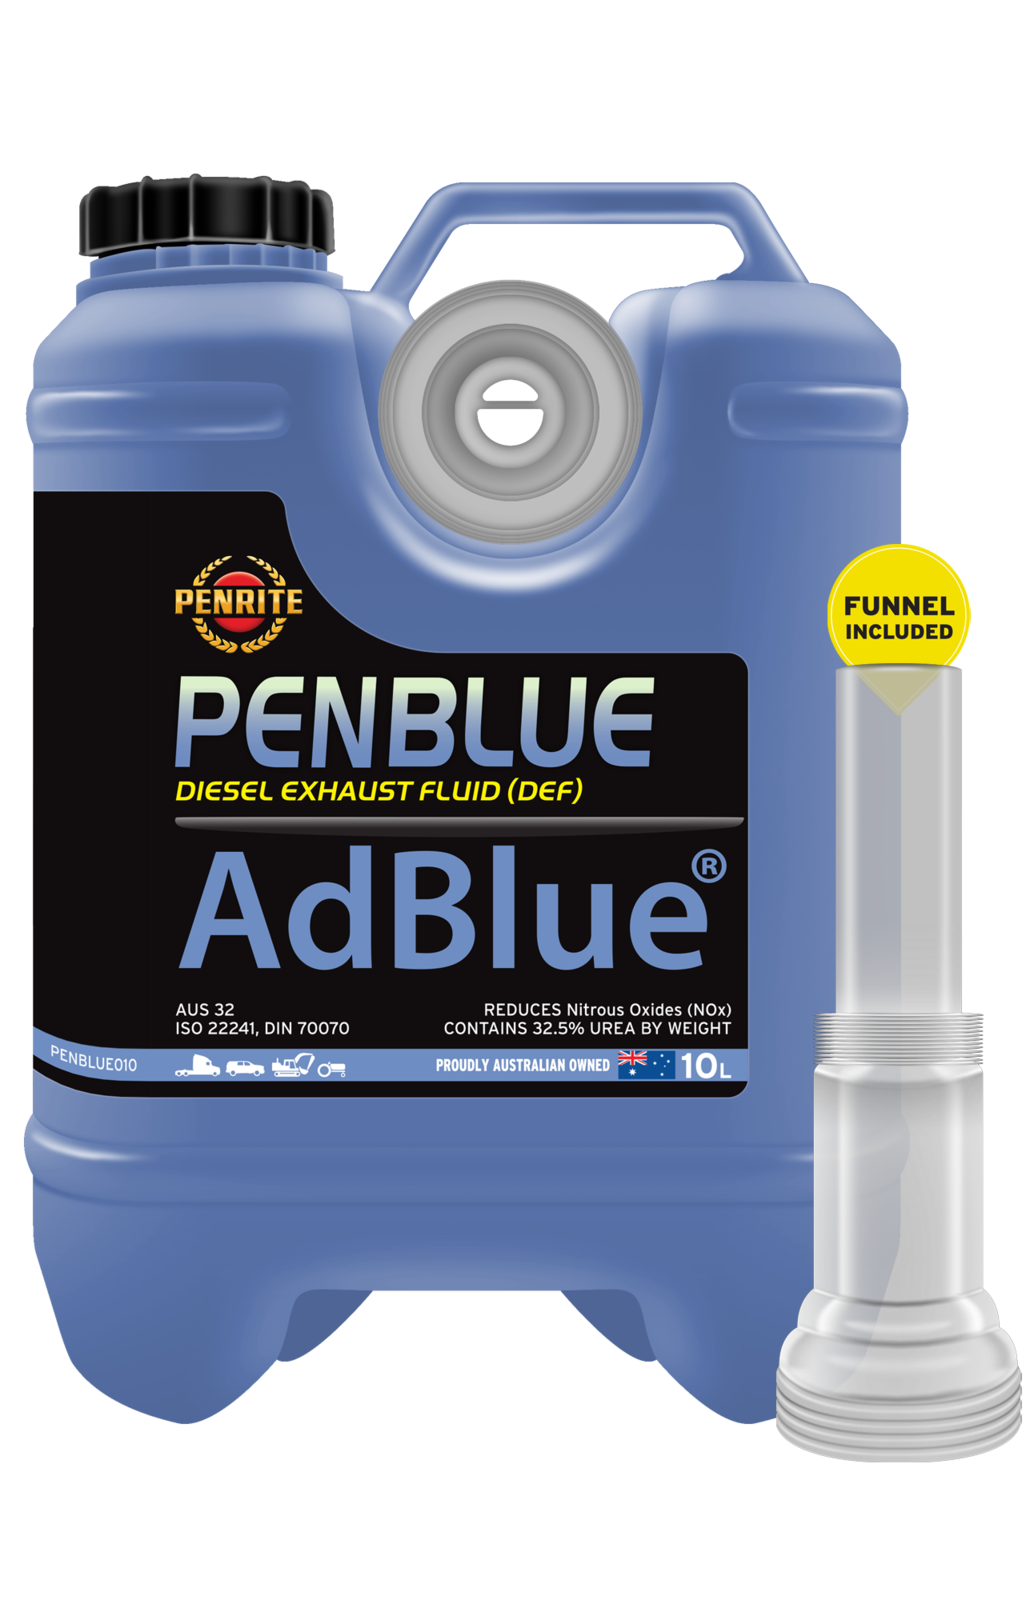 Penrite Full Synthetic Automatic Transmission Fluid LV 4L - ATFLV004 -  Penrite